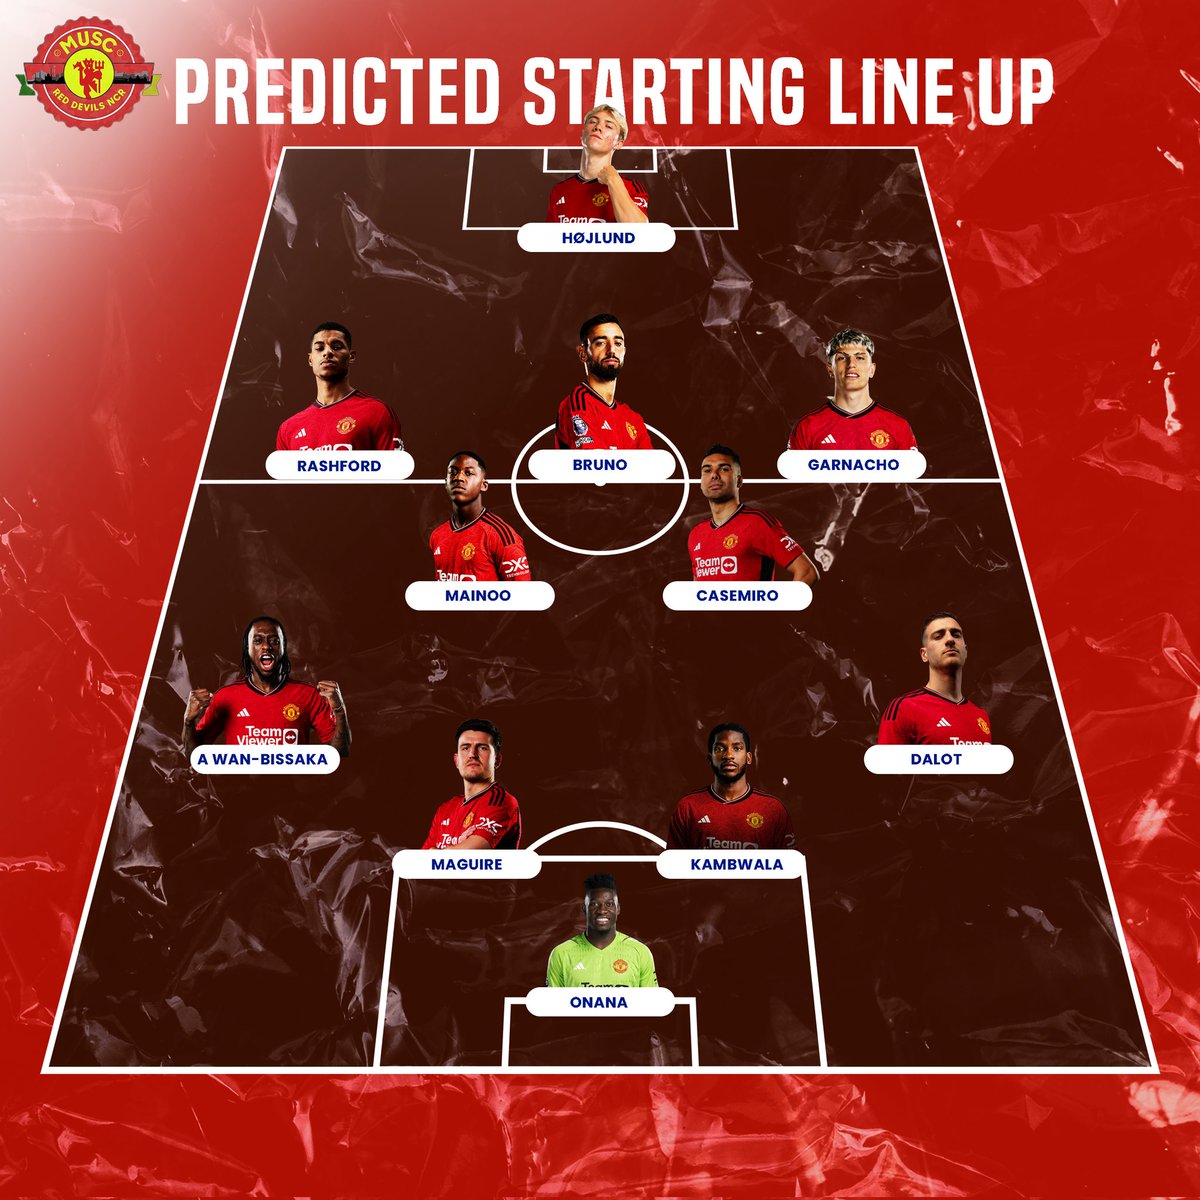 Our predicted XI against Coventry in the FA Cup semi-final. #ManchesterUnited #manunited #MUFC #FACup